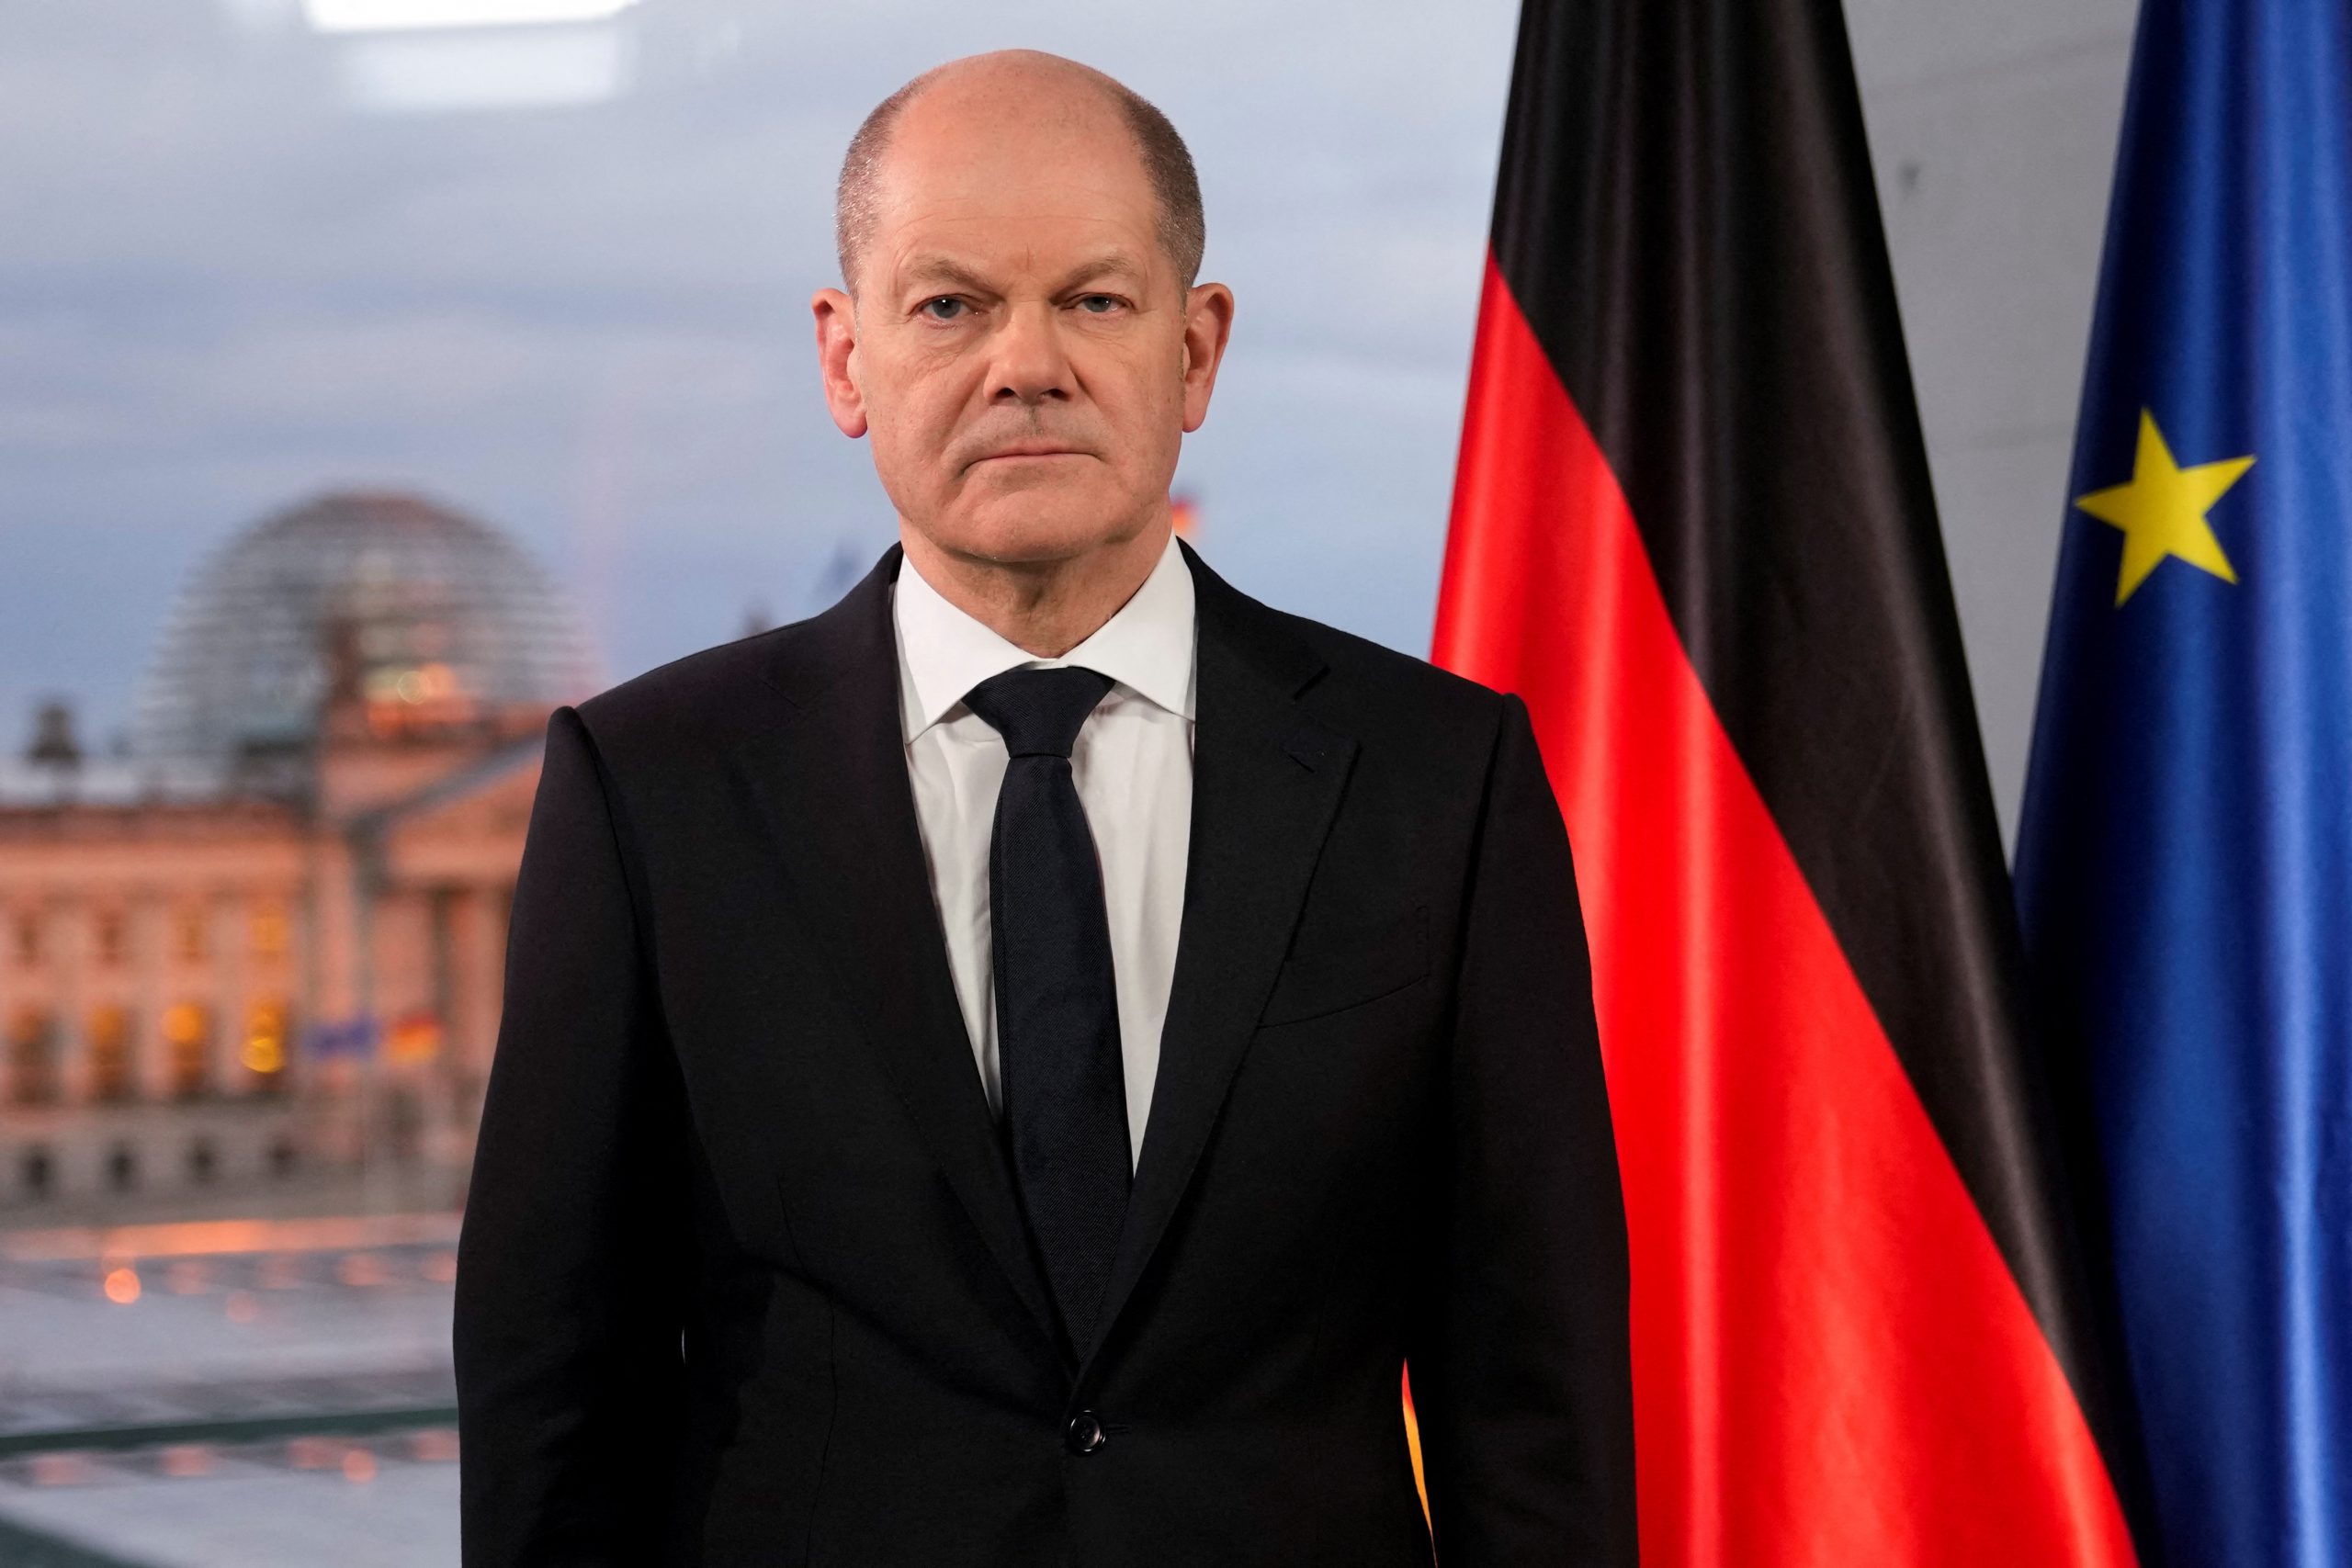 German Chancellor Olaf Scholz will visit Lithuania to discuss NATO